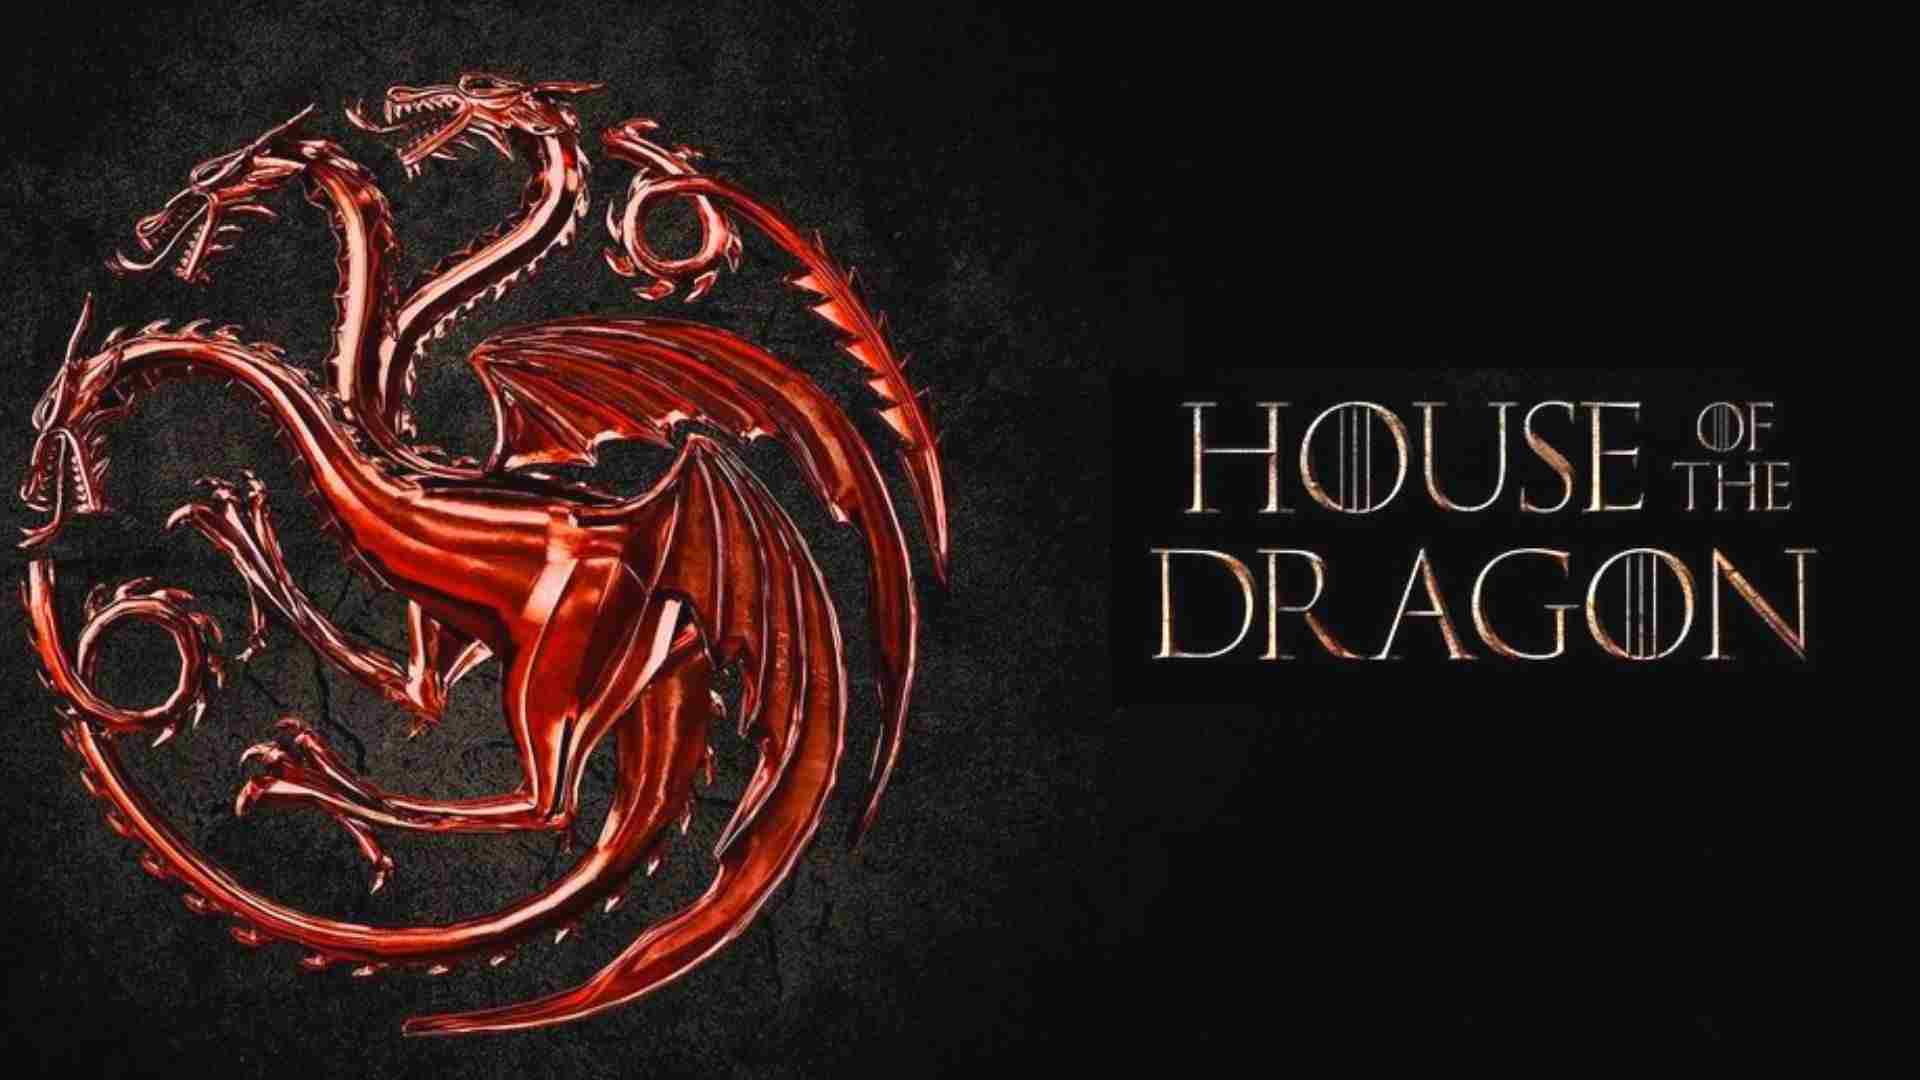 House of the Dragon Parents guide and age rating | 2022